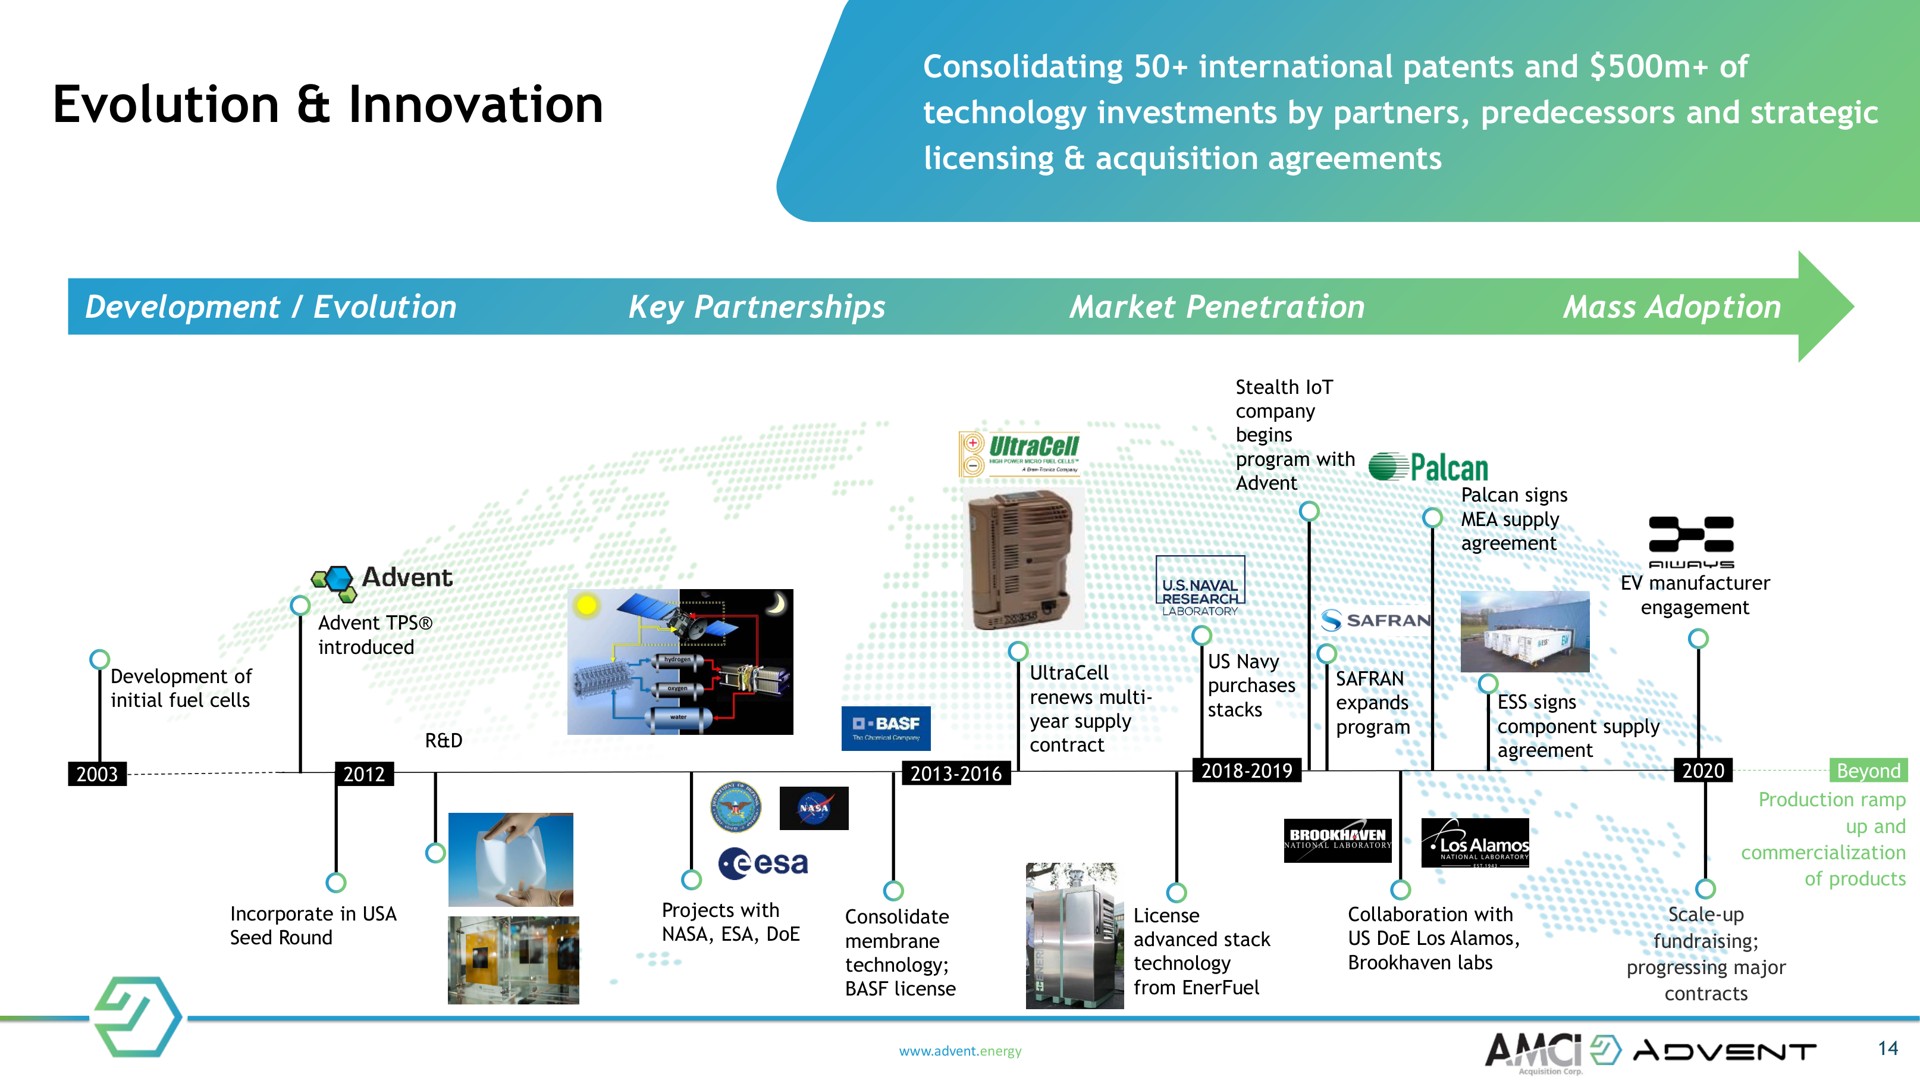 evolution innovation consolidating international patents and of technology investments by partners predecessors and strategic licensing acquisition agreements development key partnerships market penetration mass adoption stealth lot company begins he program with development of initial fuel cells introduced wees laboratory manufacturer signs supply agreement renews year supply contract expands program a ess signs component supply agreement min alamo production ramp commercialization of products incorporate in seed round projects with doe consolidate membrane technology license license advanced stack technology from collaboration with us doe alamos labs scale up progressing major contracts energy a a | Advent